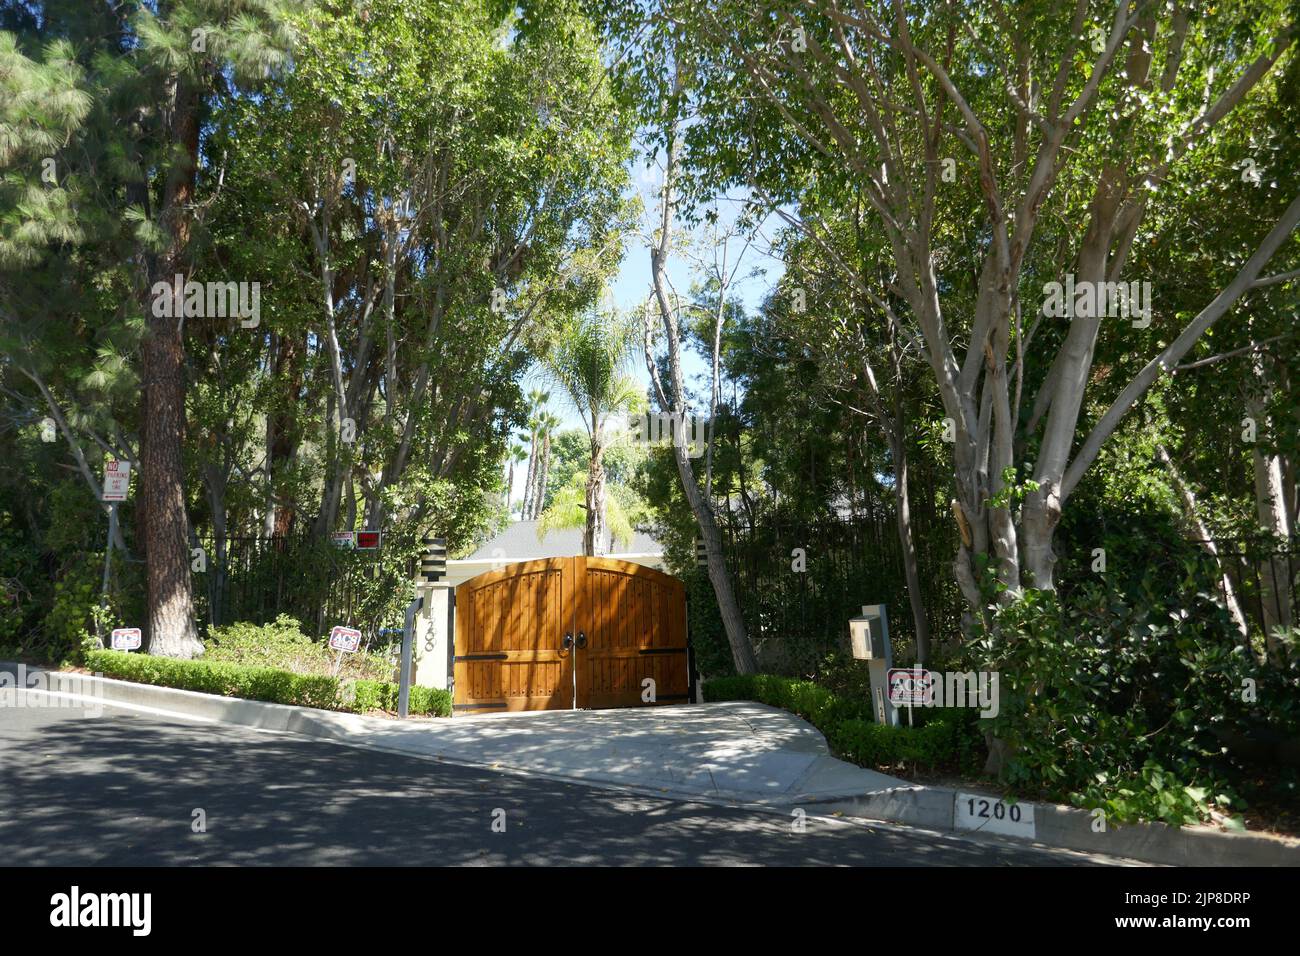 Beverly Hills, California, USA 15th August 2022 Singer Luther Vandross's Former Home/house at 1200 Chanruss Place on August 15, 2022 in Beverly Hills, California, USA. Photo by Barry King/Alamy Stock Photo Stock Photo